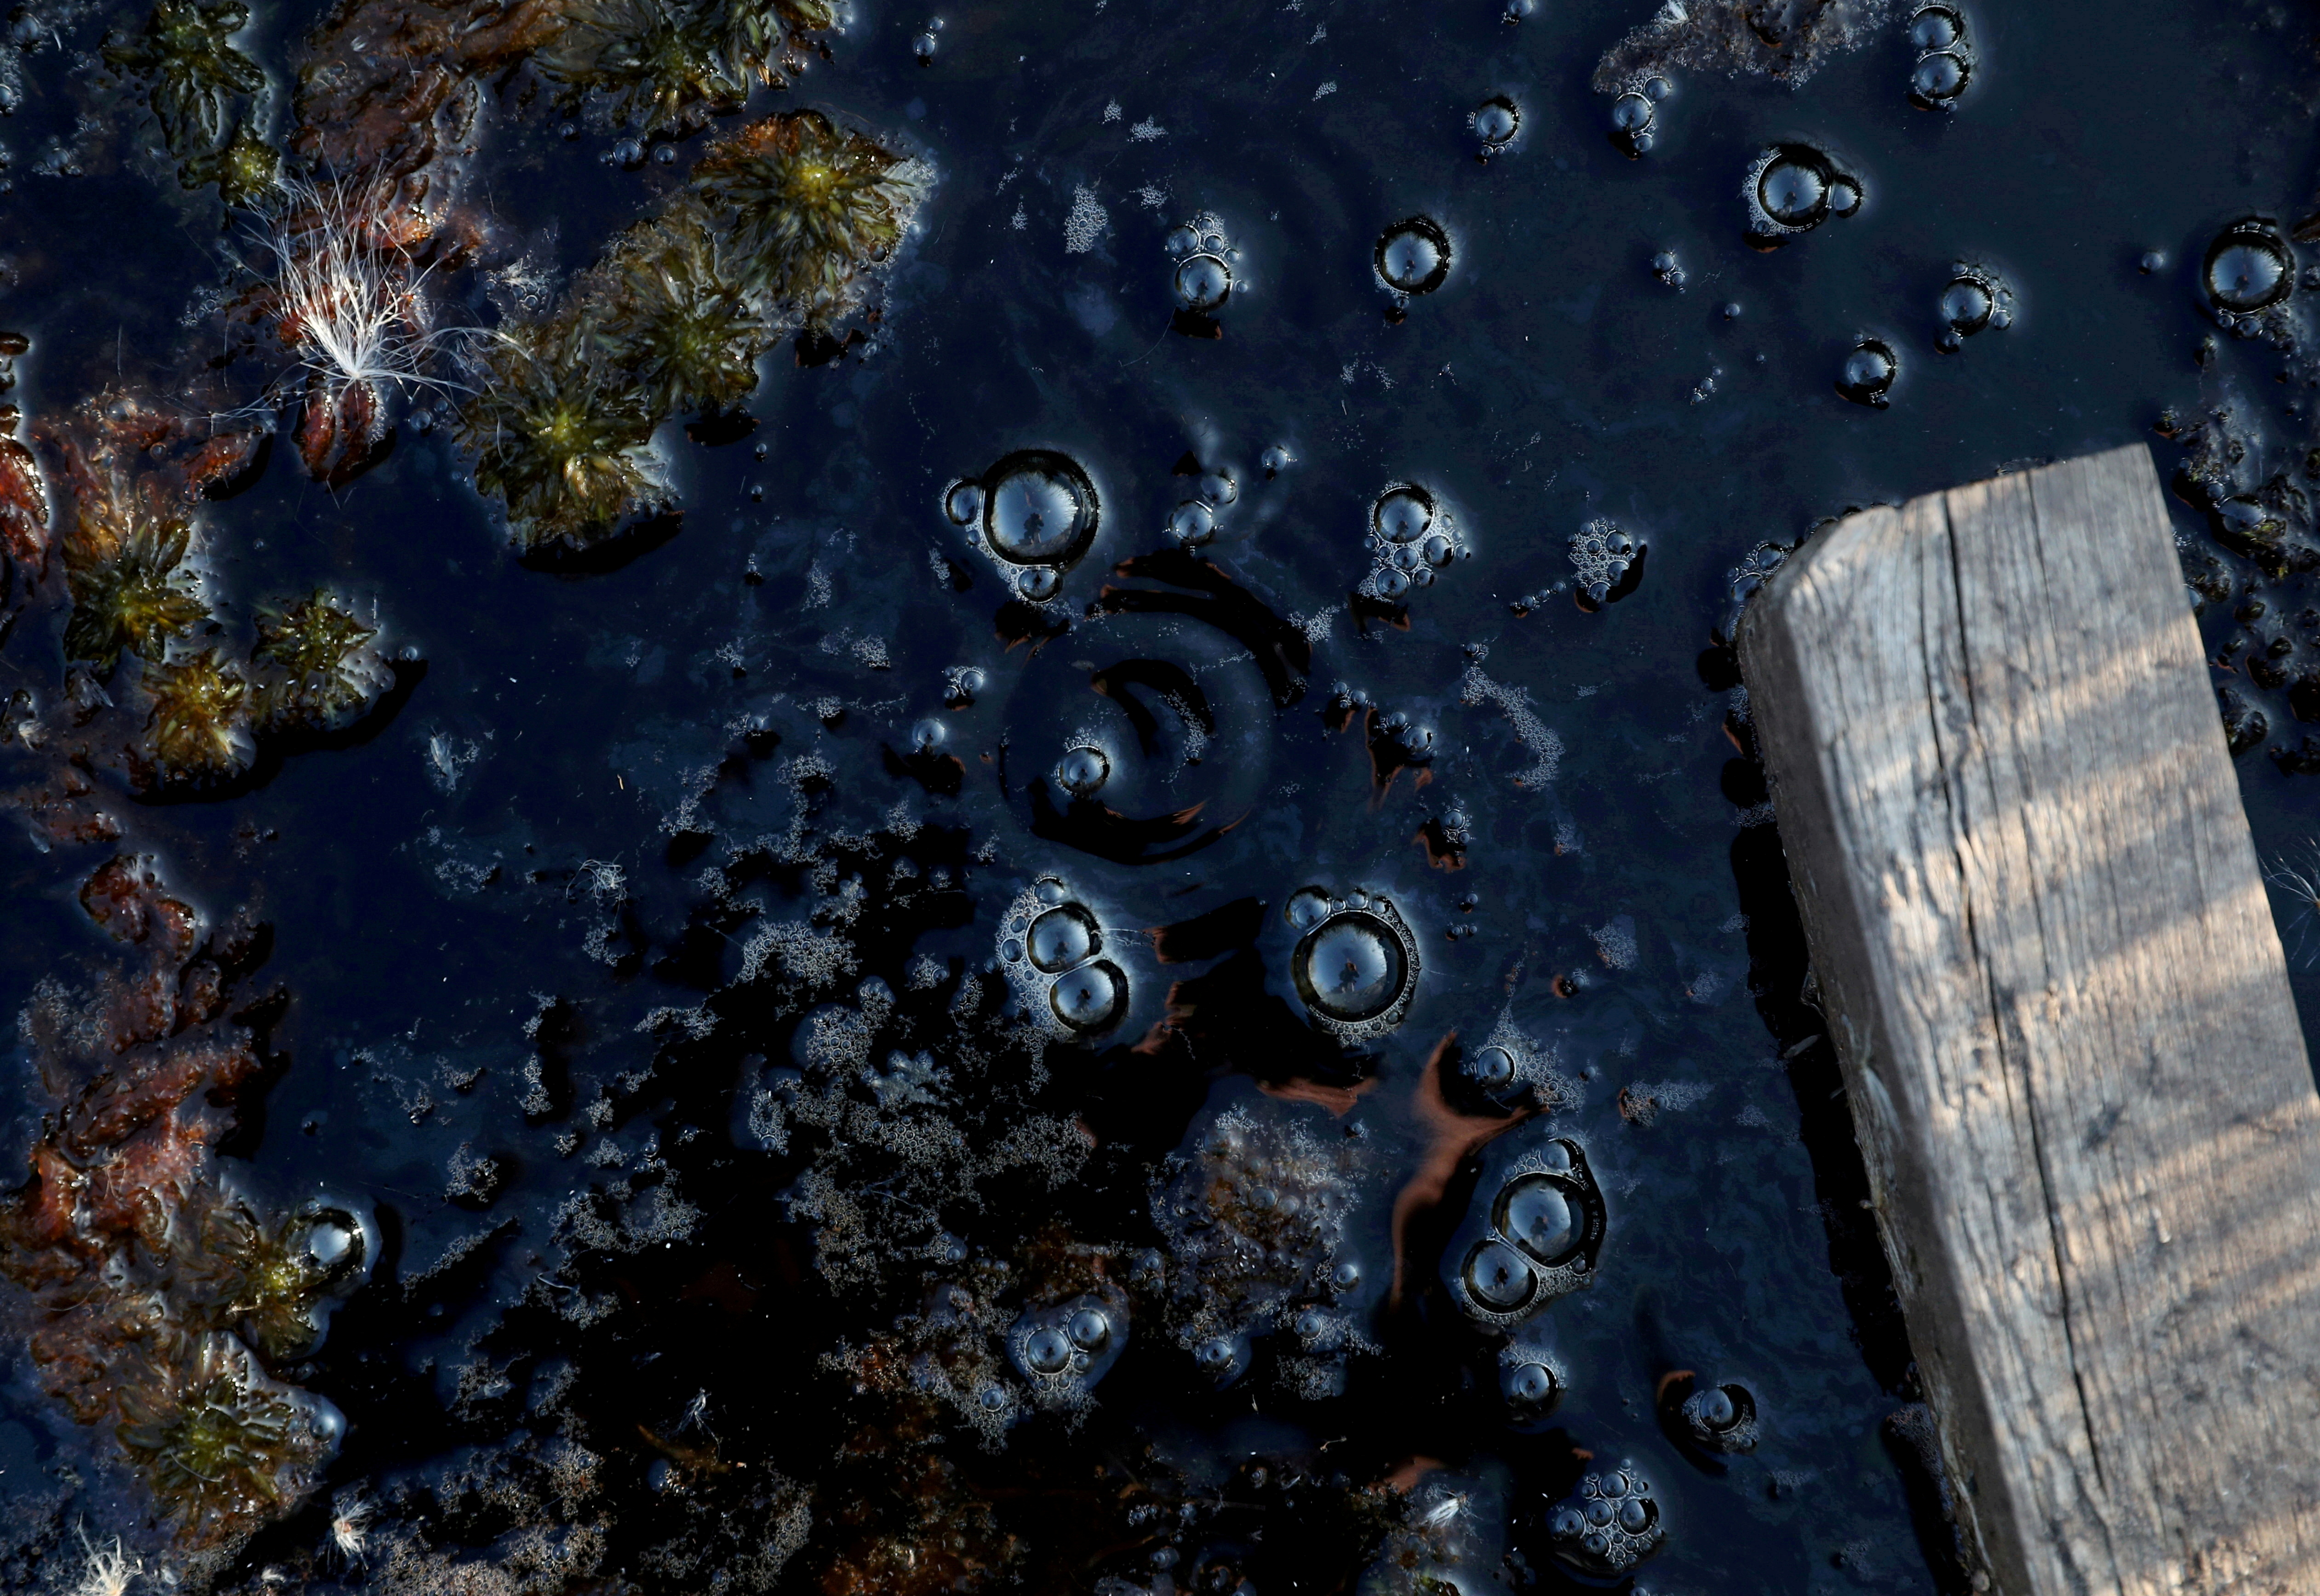 Methane bubbles are seen in an area of marshland at a research post at Stordalen Mire near Abisko, Sweden, August 1, 2019.REUTERS/Hannah McKay/File Photo